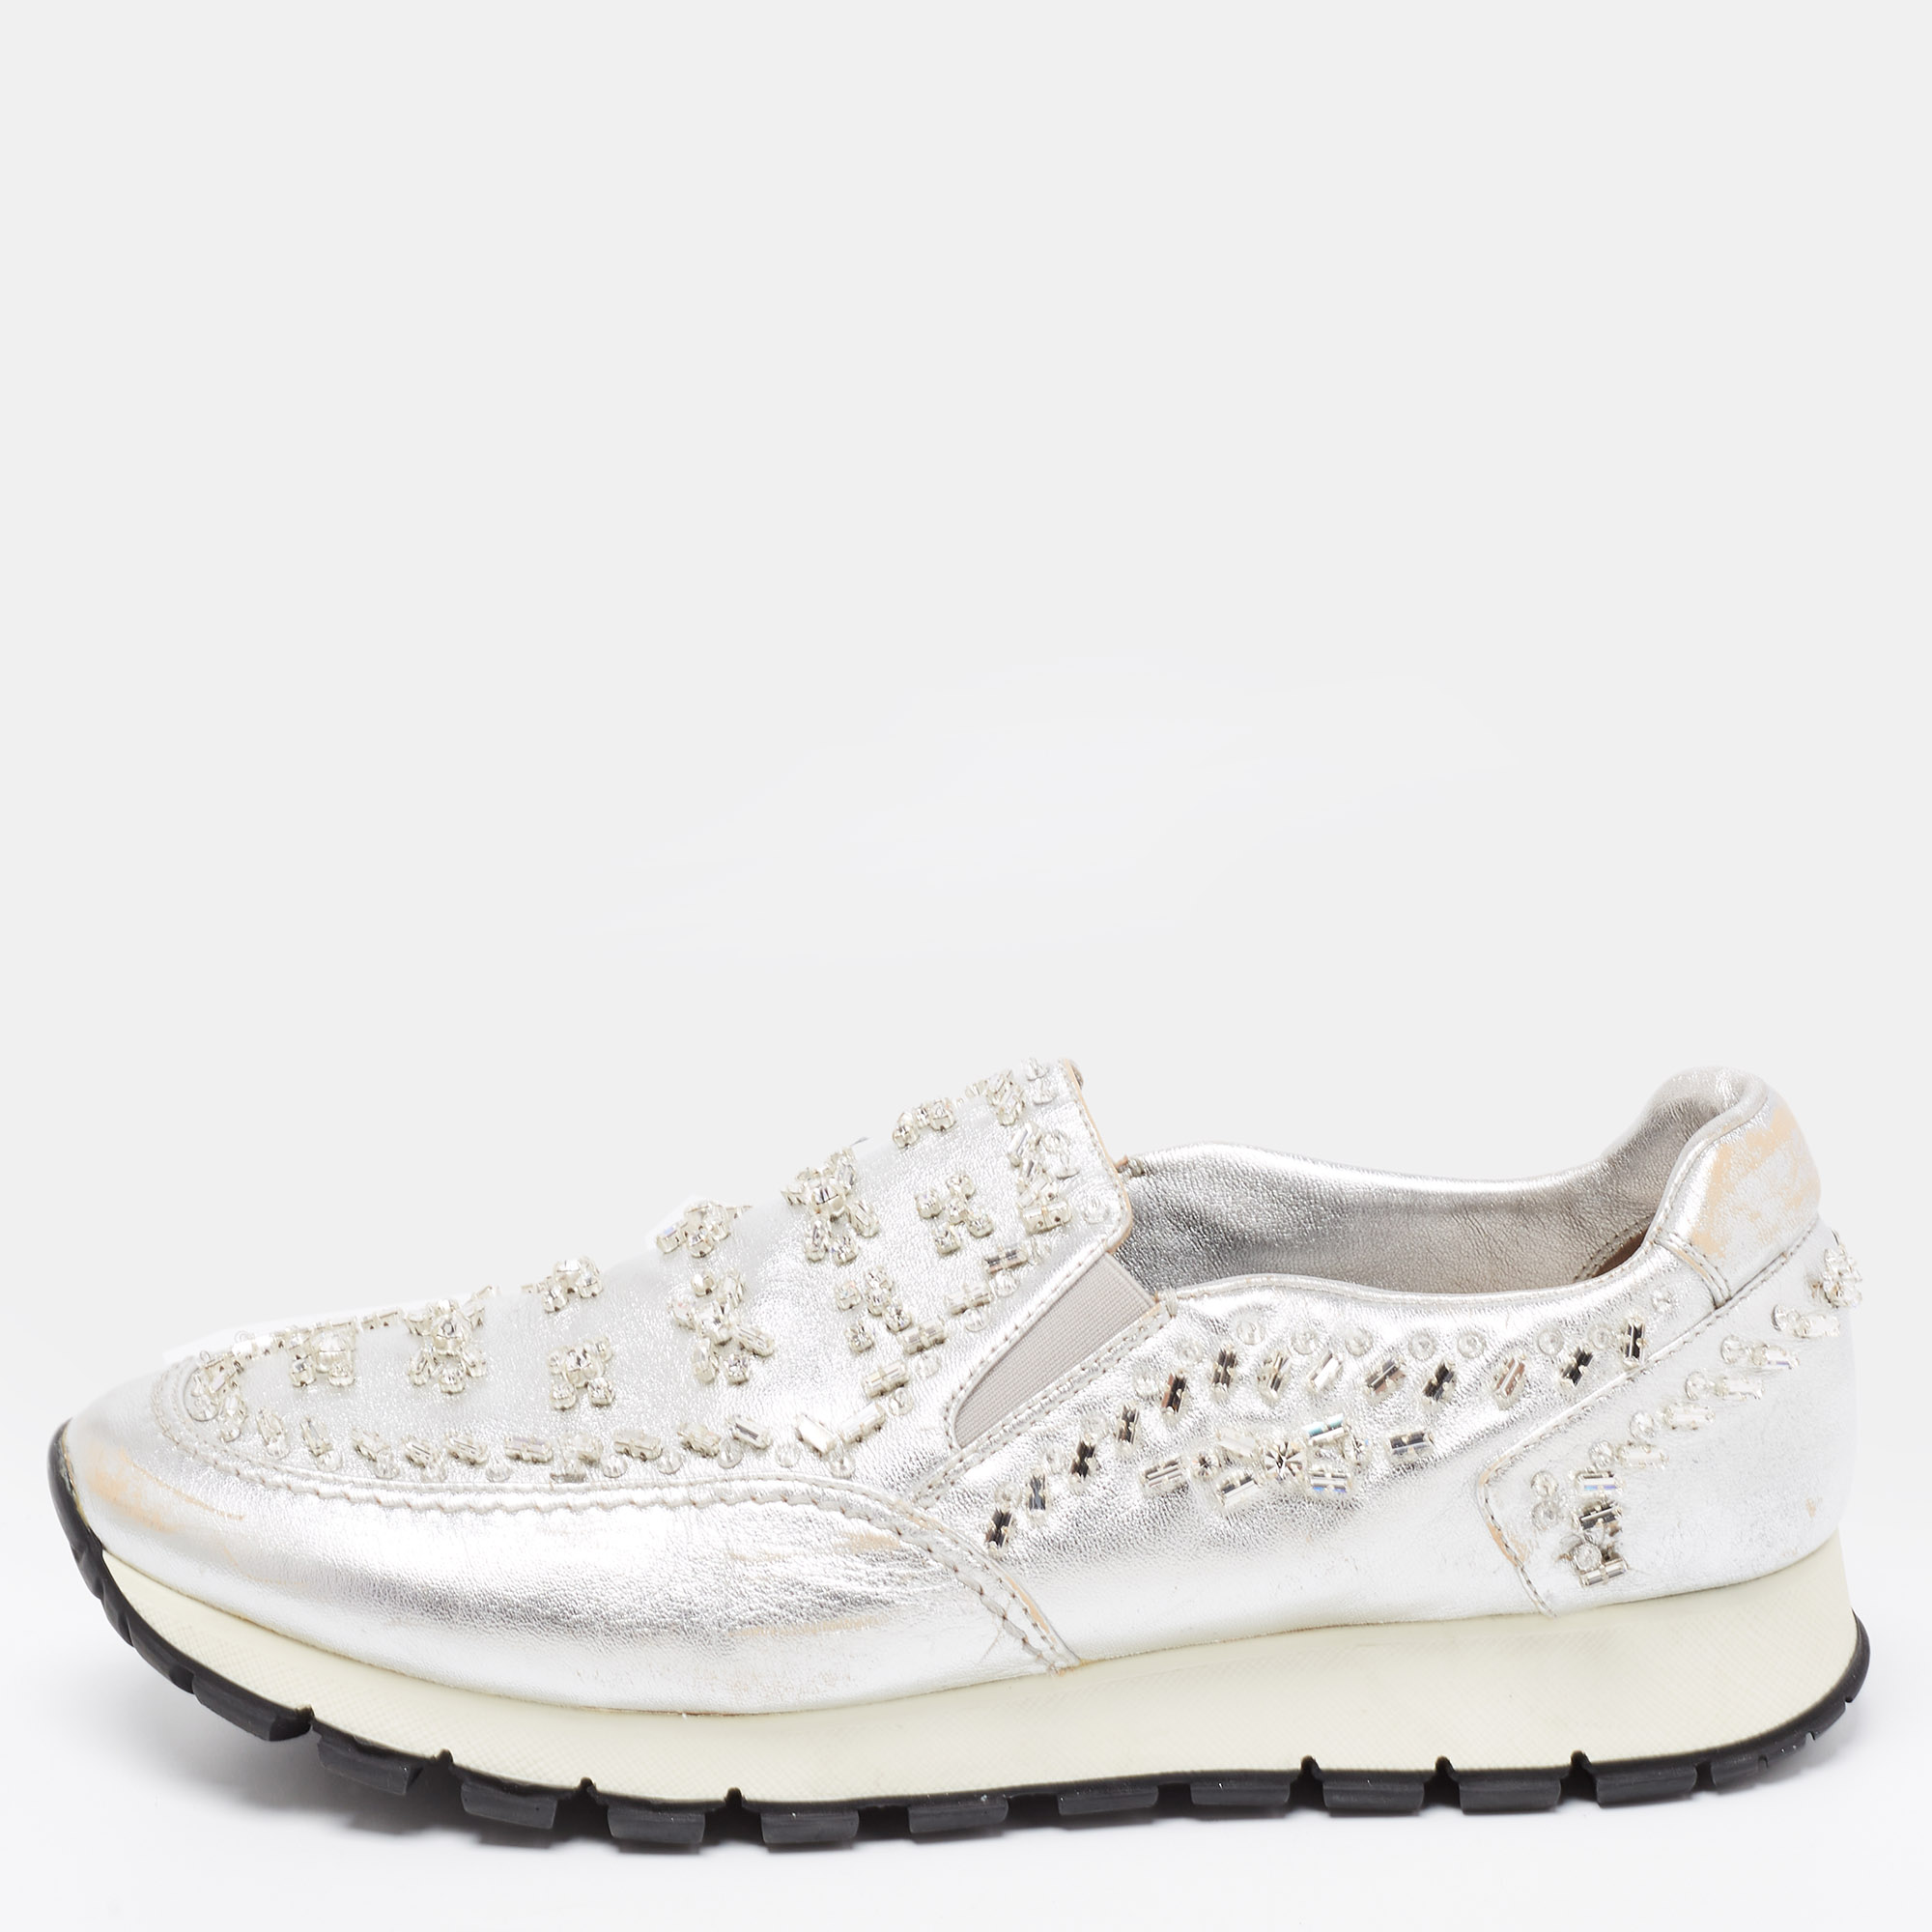 

Prada Silver Leather Embellished Slip On Sneakers Size